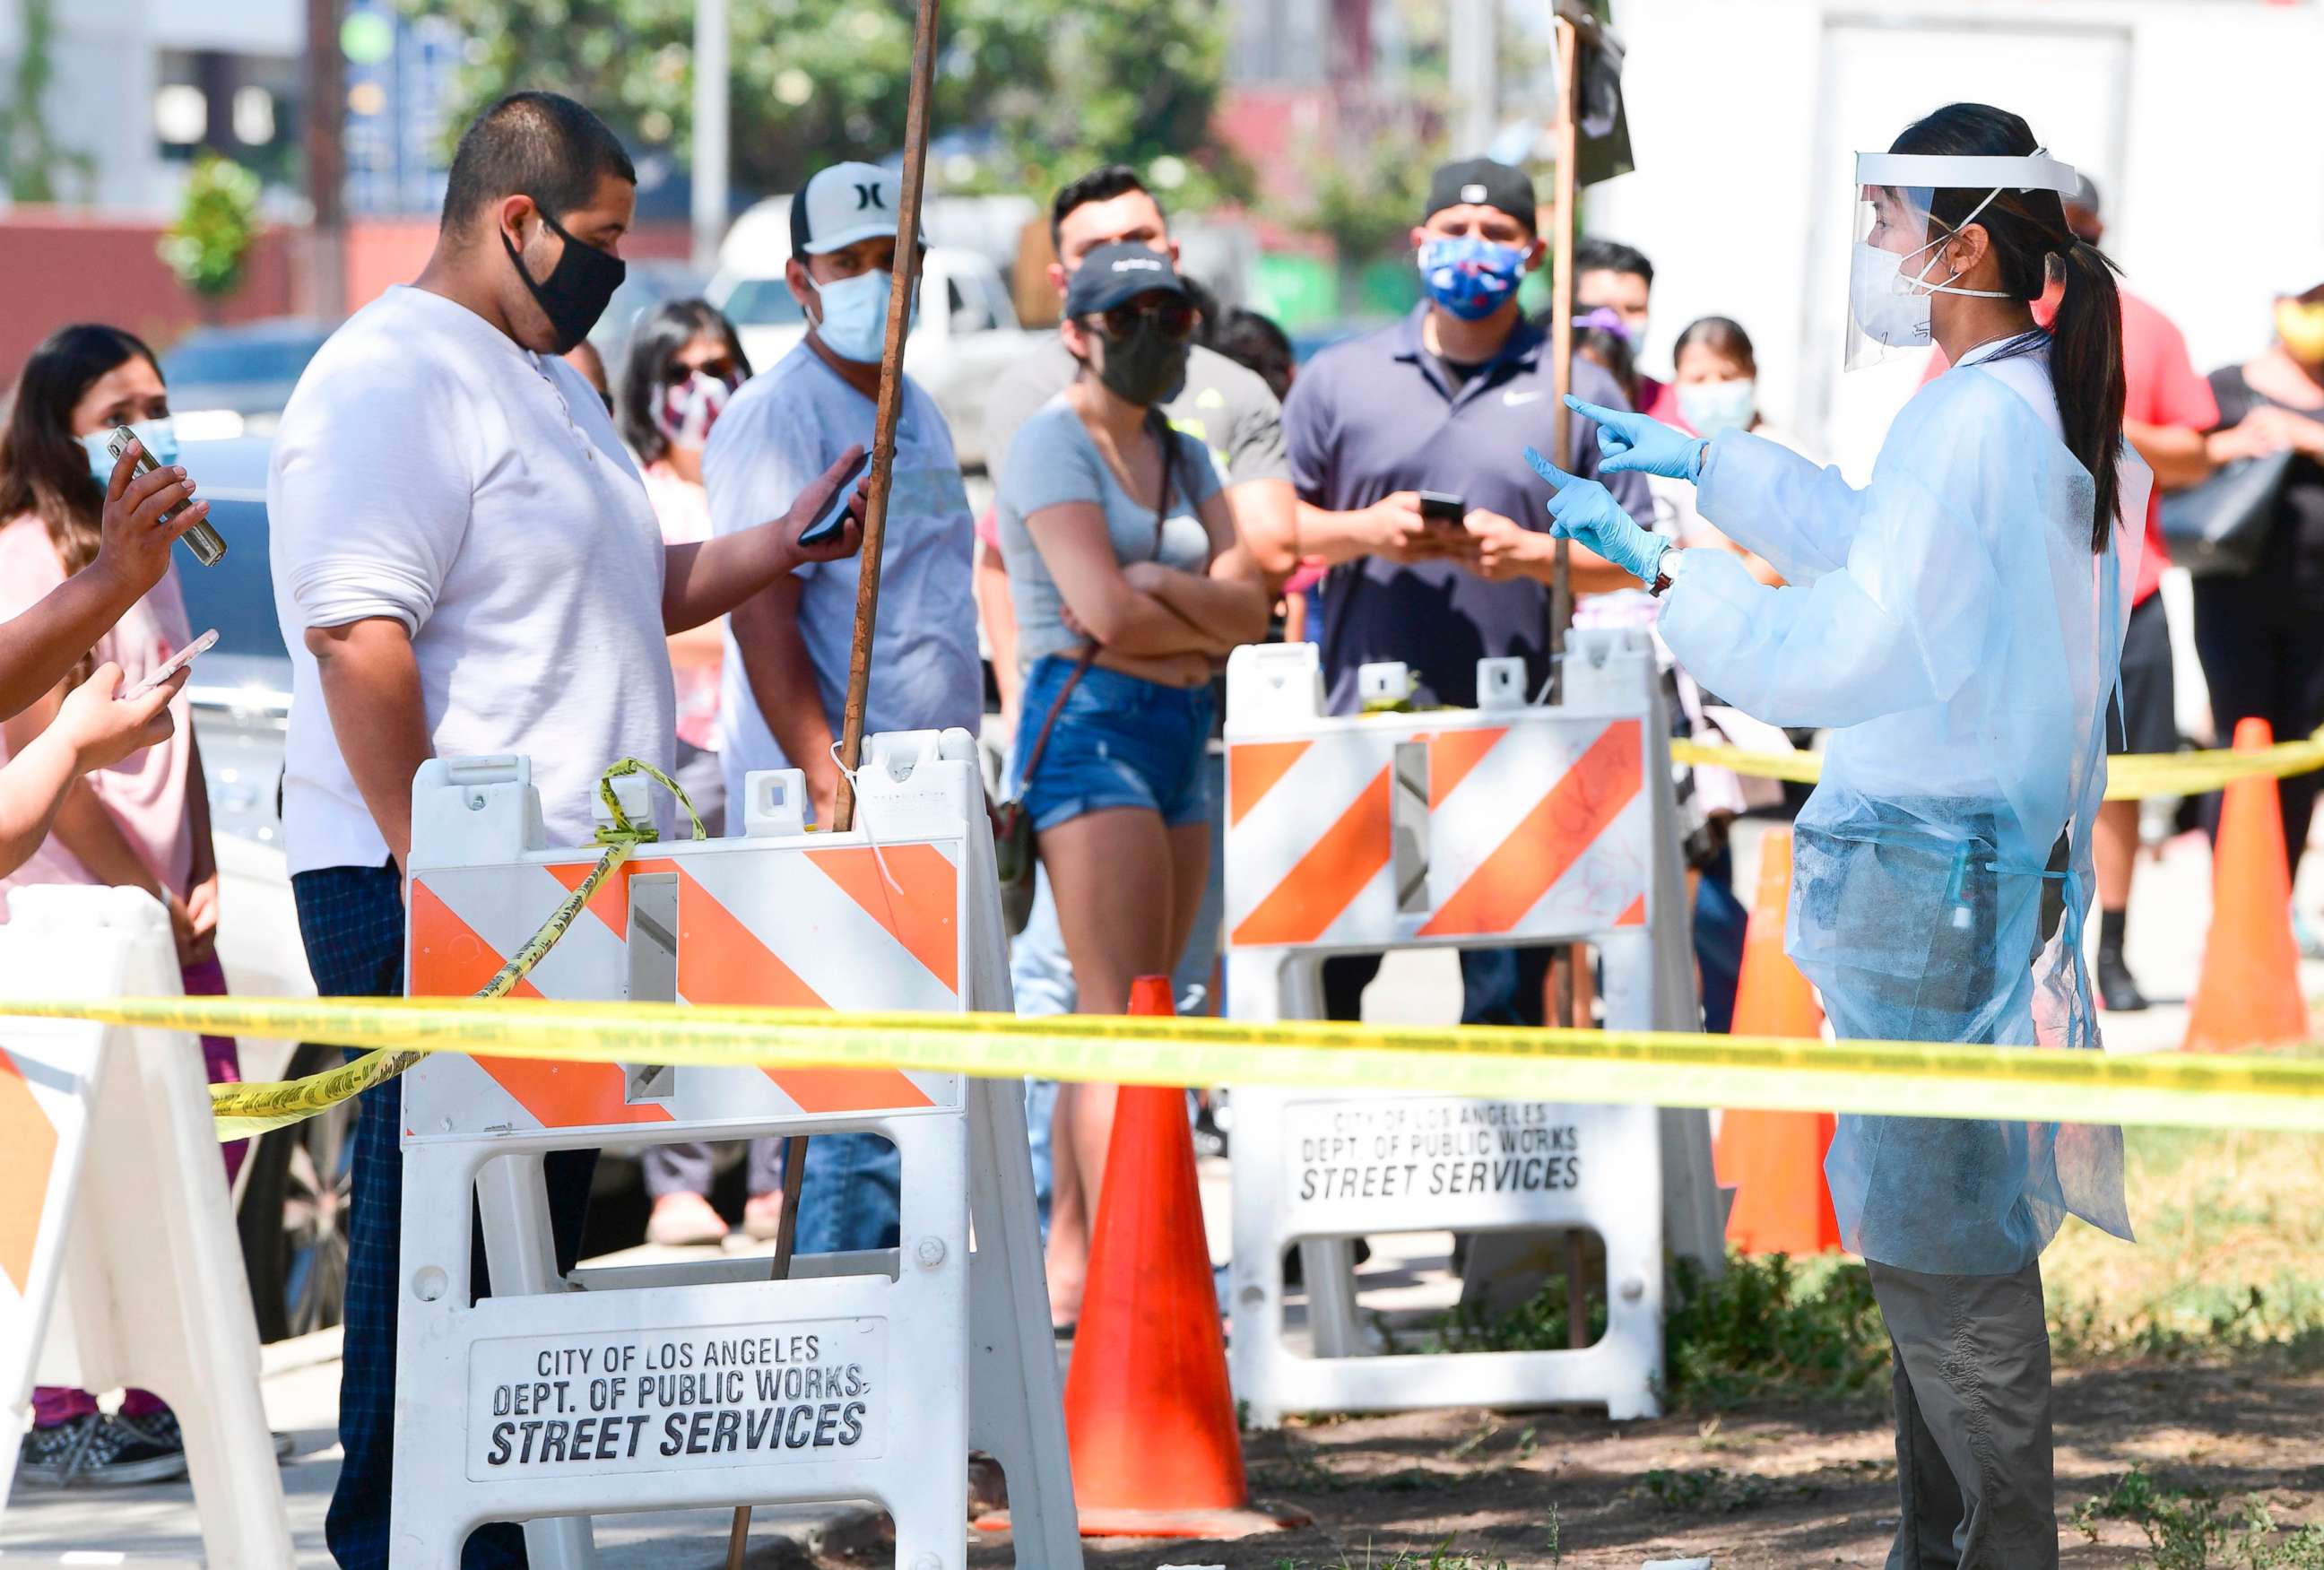 PHOTO: A COVID-19 test site volunteer speaks with people waiting in line at a walk-in coronavirus test site in Los Angeles, July 10, 2020.